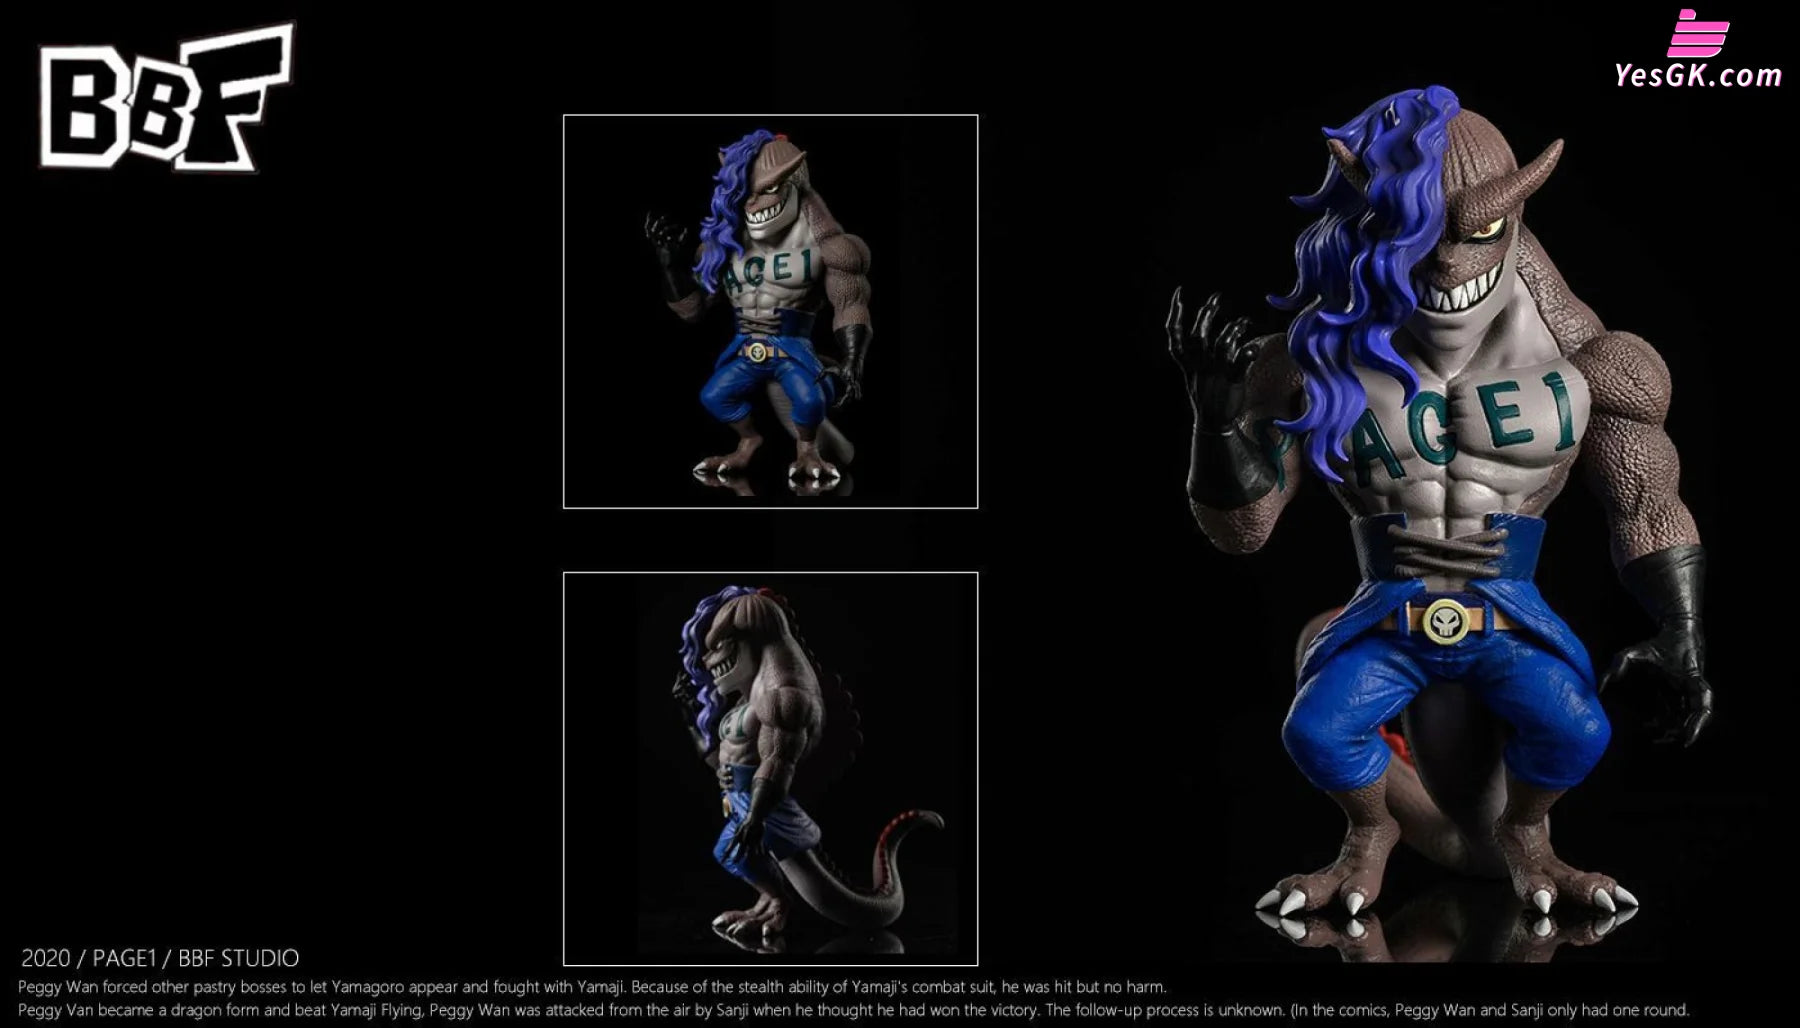 One Piece Pageone (Beast Form) Resin Statue - Bbf Studio [Pre-Order Closed] Full Payment